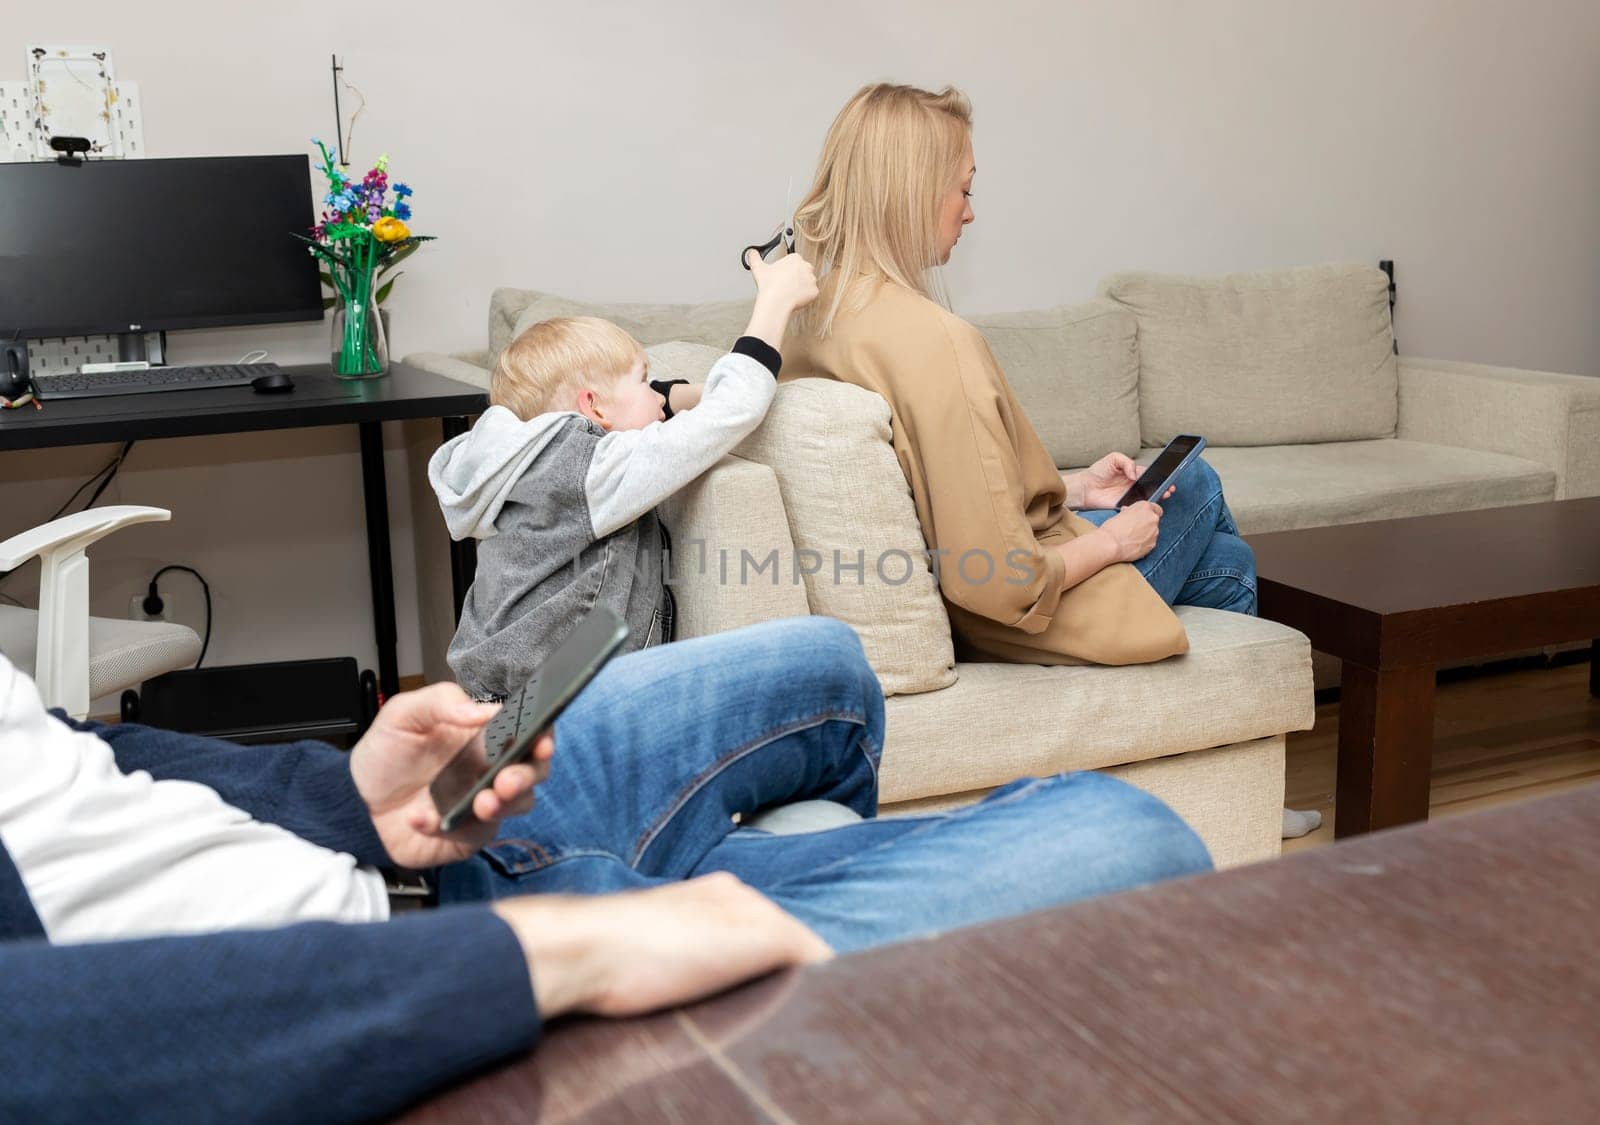 Little Boy Cuts Mother's Hair With Scissors While Parents Look, Sit At Smartphone. Deprivation, Disconnected Family, Emotionally Cold Parents, Social Issue. Horizontal Plane.